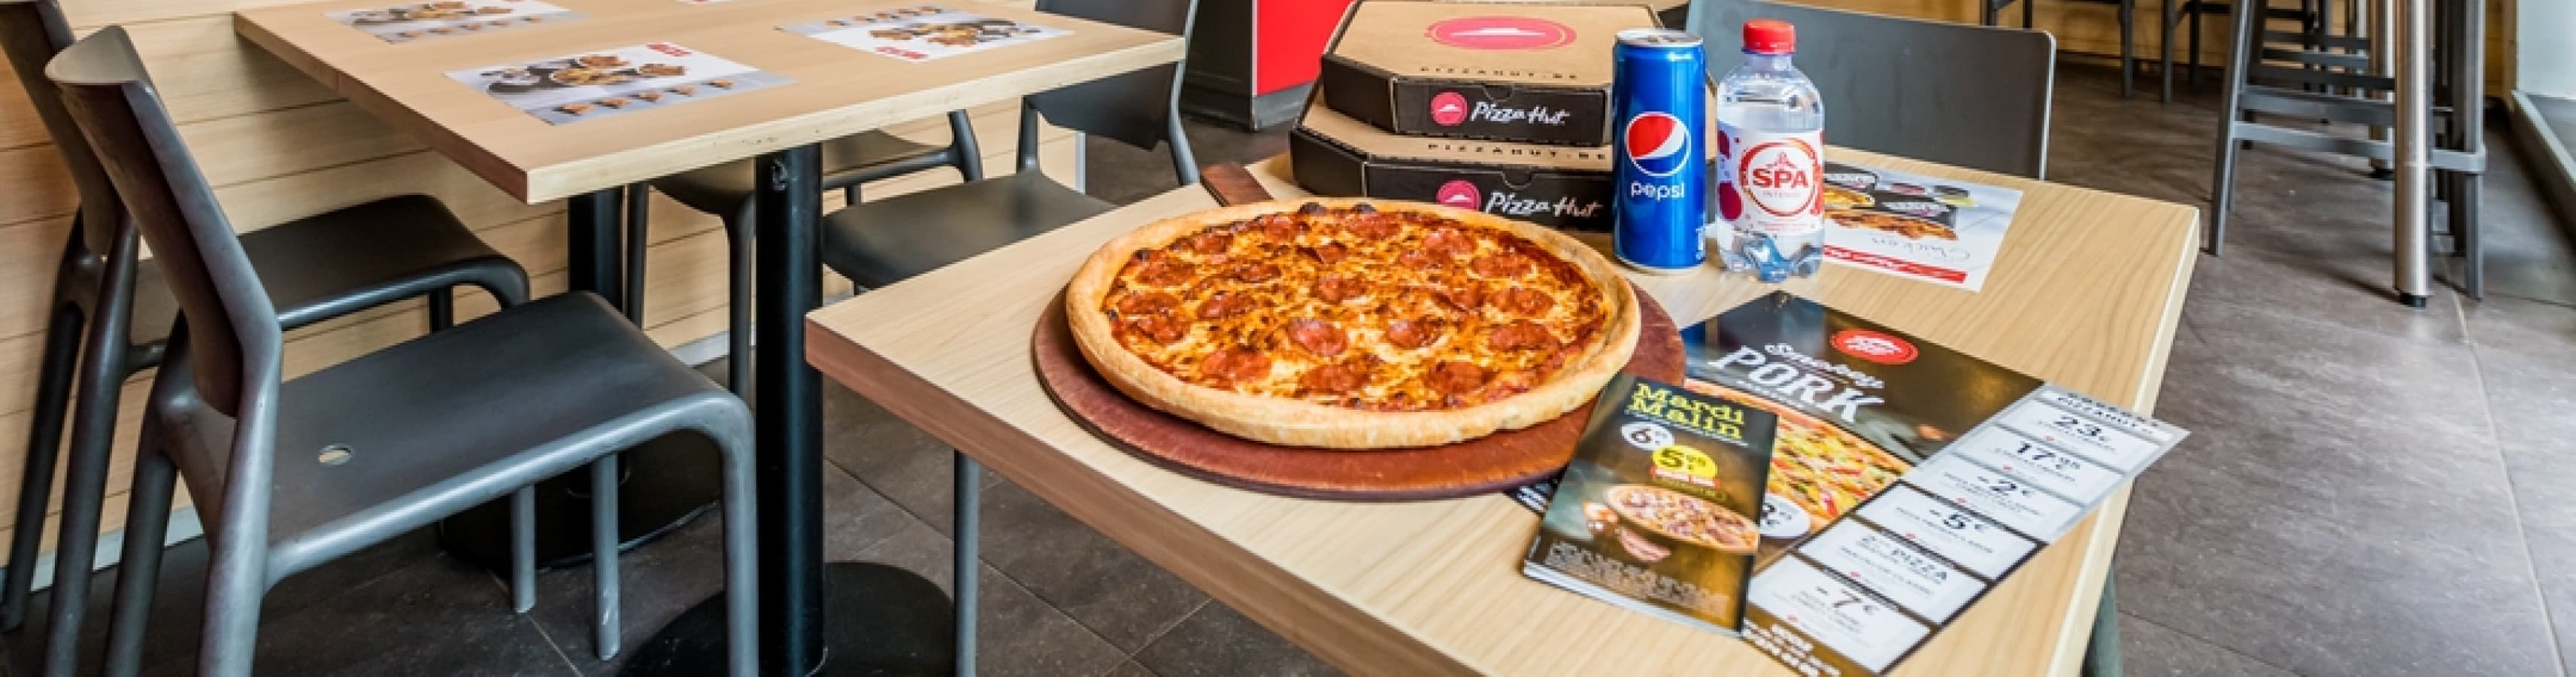 Pizza Hut Delivery Uccle Sint-Job